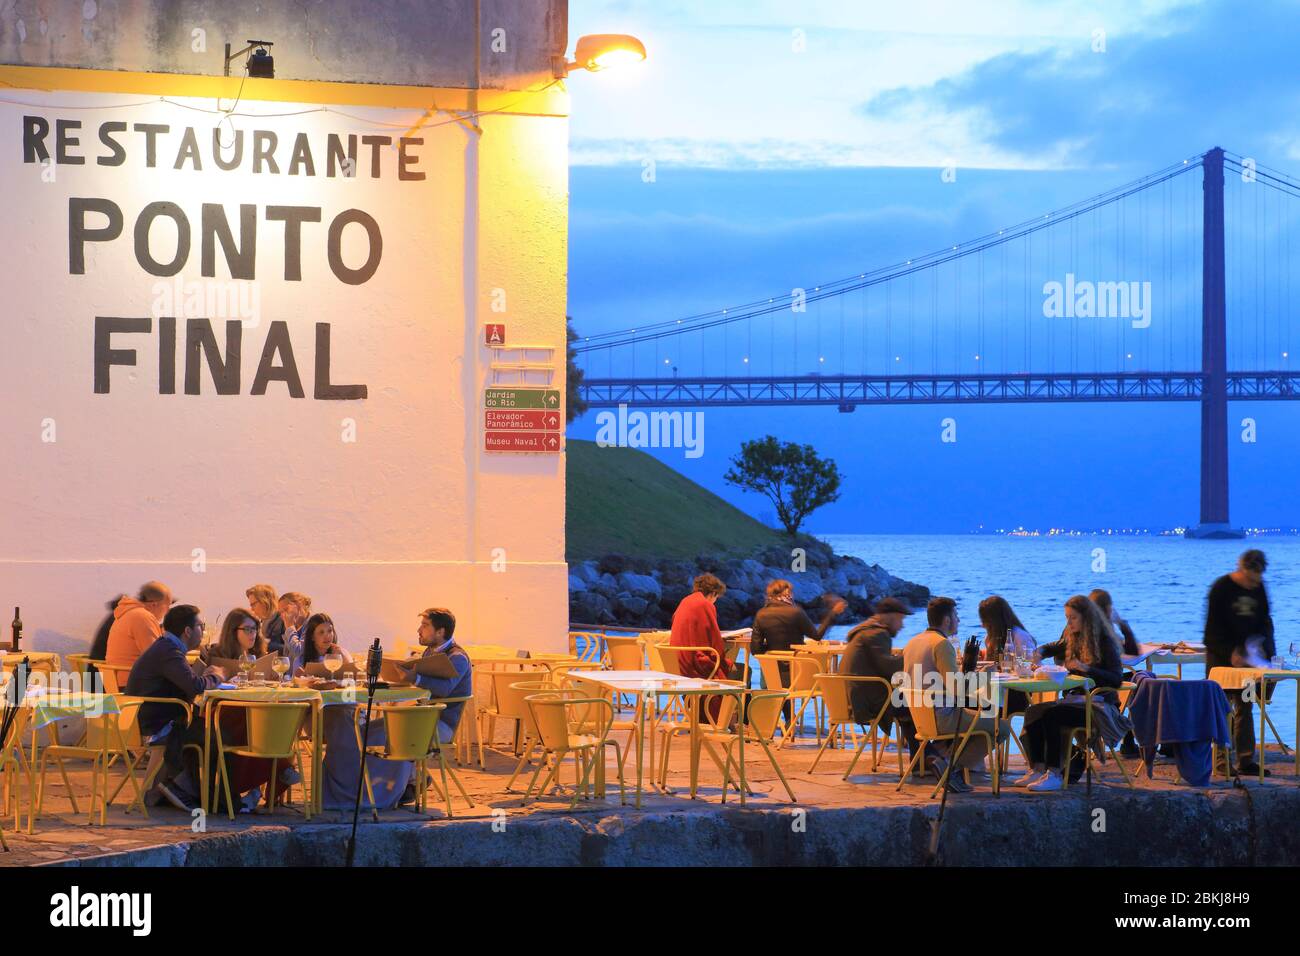 Portugal, Lisbon, Almada, traditional Portuguese restaurant Ponto Final on the Tagus river with Ponte 25 de Abril in the background Stock Photo